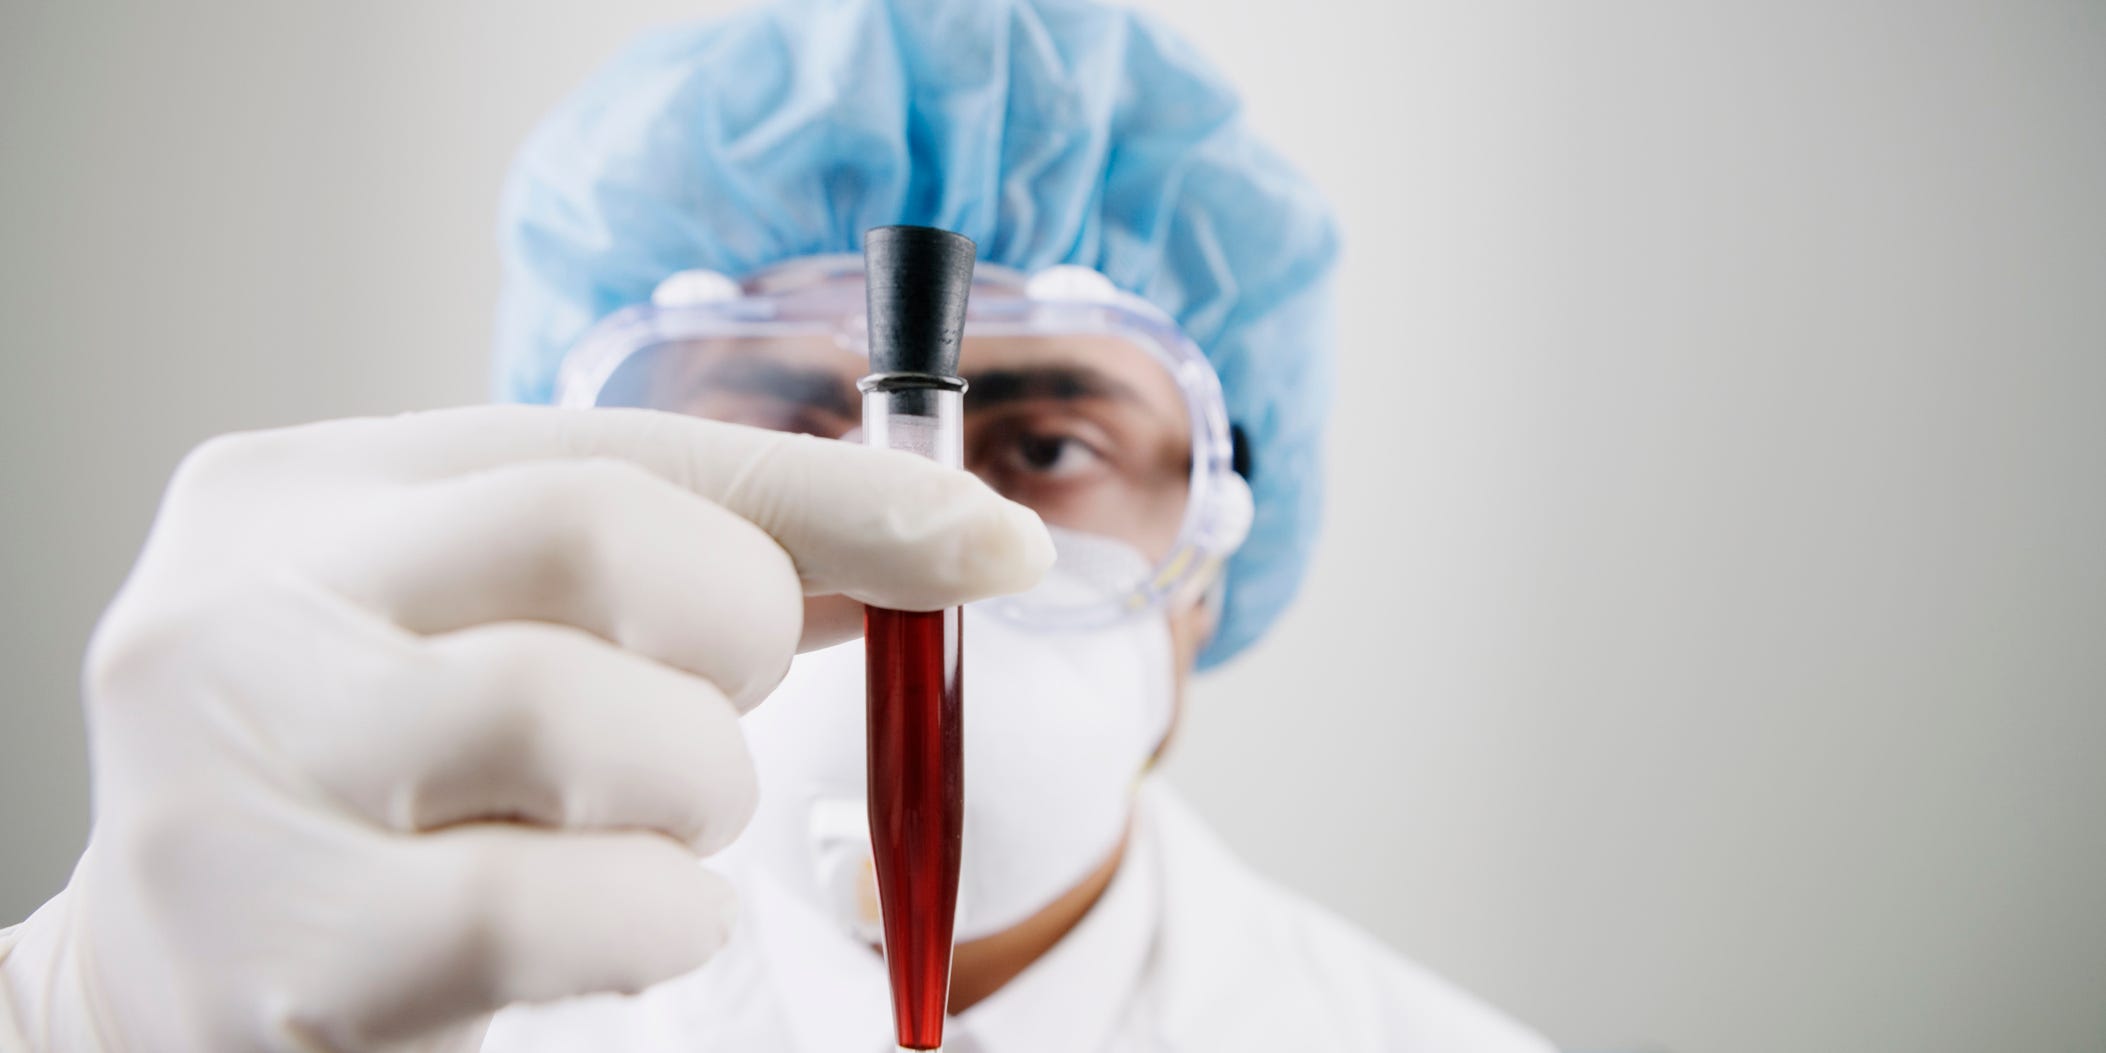 A man in a lab coat and white rubber gloves holds a vial of blood in front of the camera.